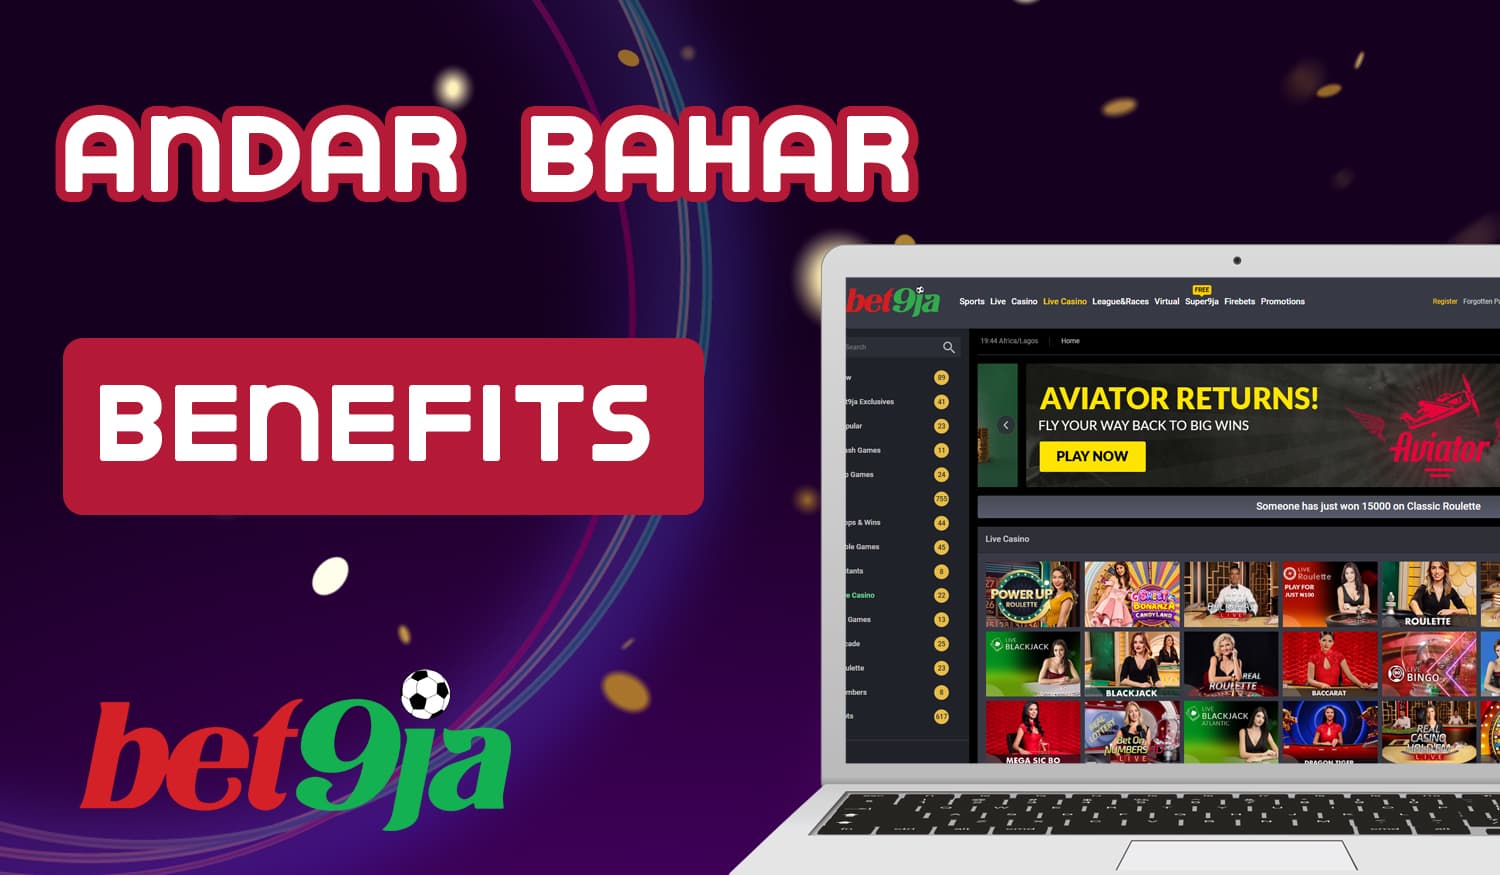 List of benefits of online Bet9ja casino for playing Andar Bahar game 